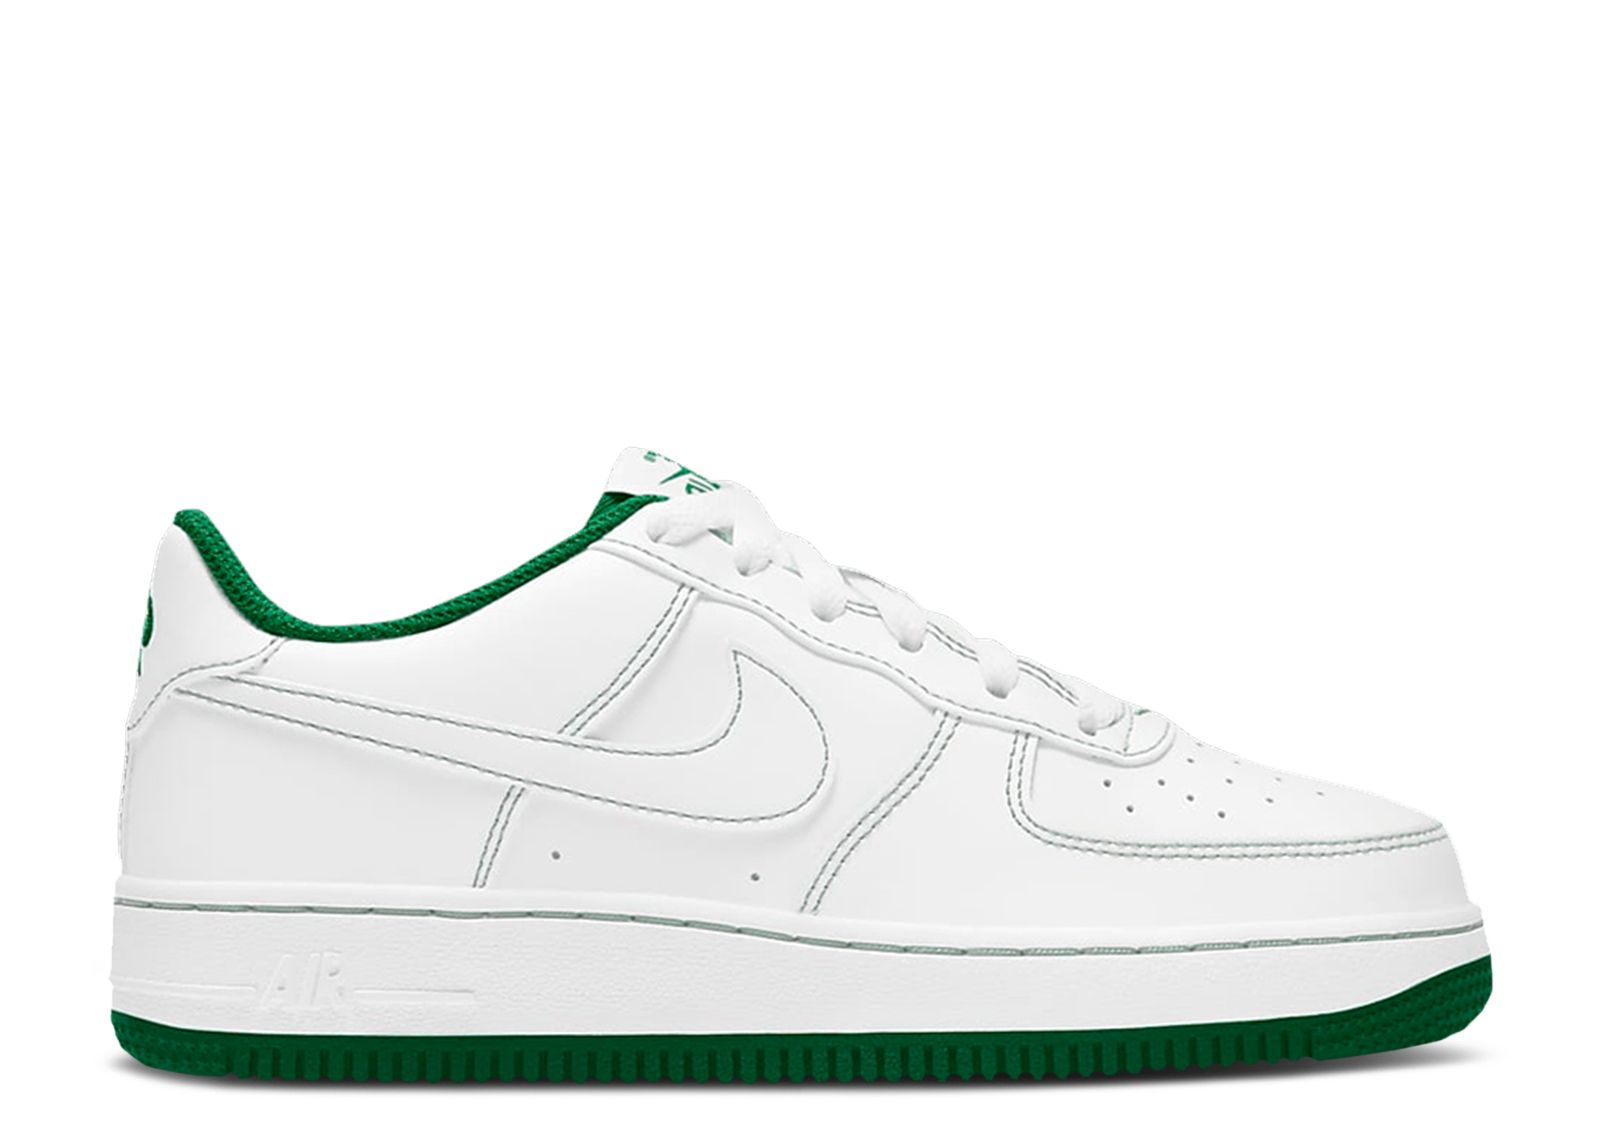 Second Chance - Nike basket running nike shoes Low White Pine Green (GS) - 37,5 | NEW